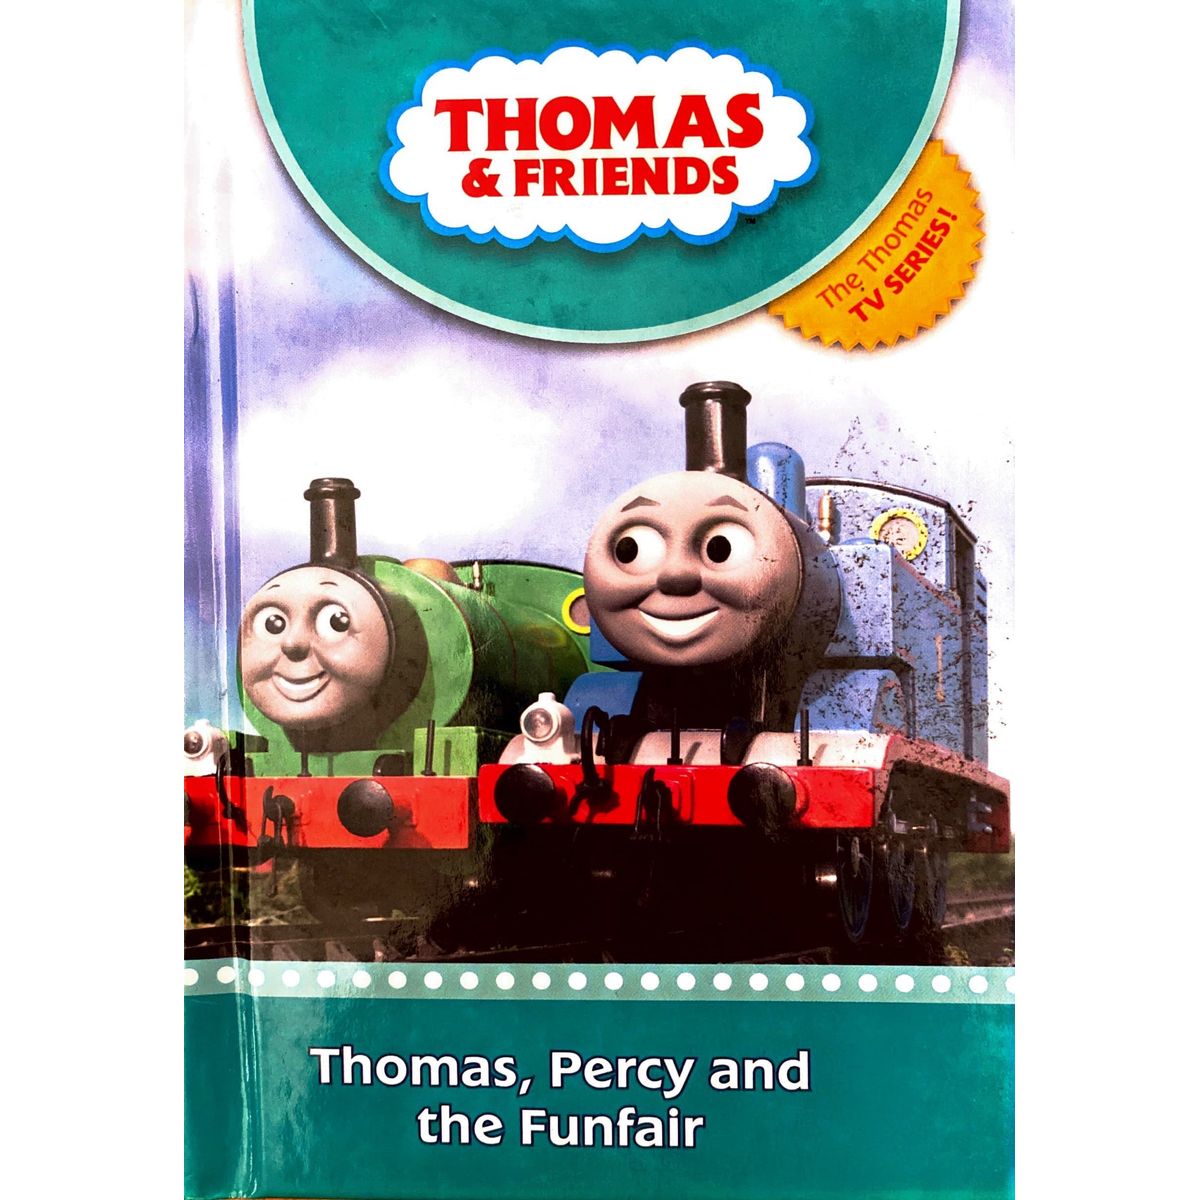 ISBN: 9780603565229 / 0603565220 - Thomas and Friends: Thomas, Percy and the Funfair by Reverend Wilbert Vere Awdry [2010]